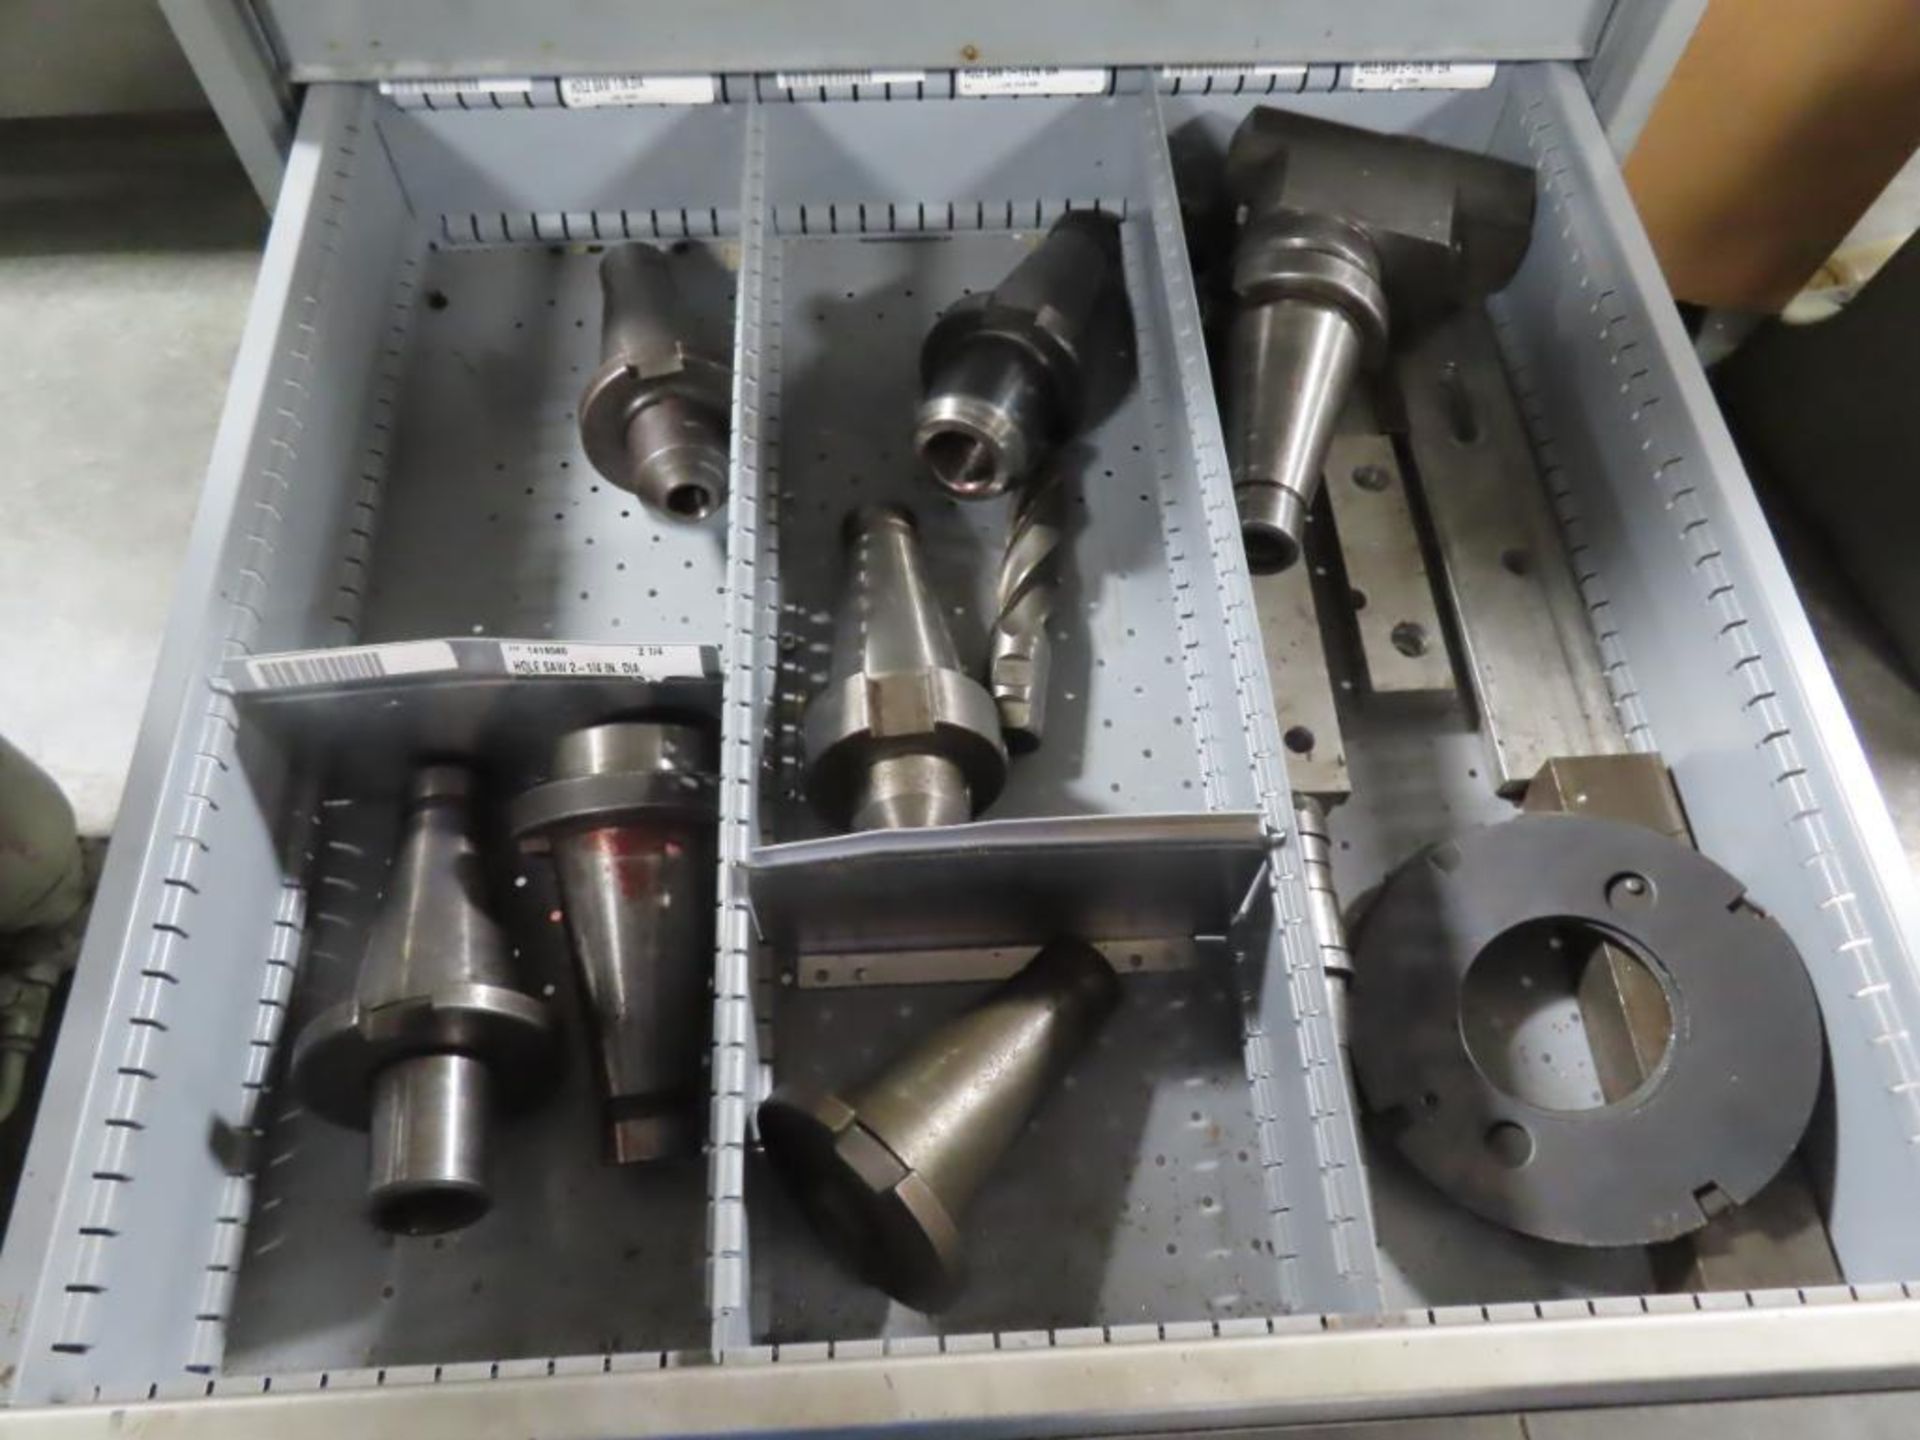 CONTENTS OF DRAWER - 50 TAPER TOOL HOLDERS